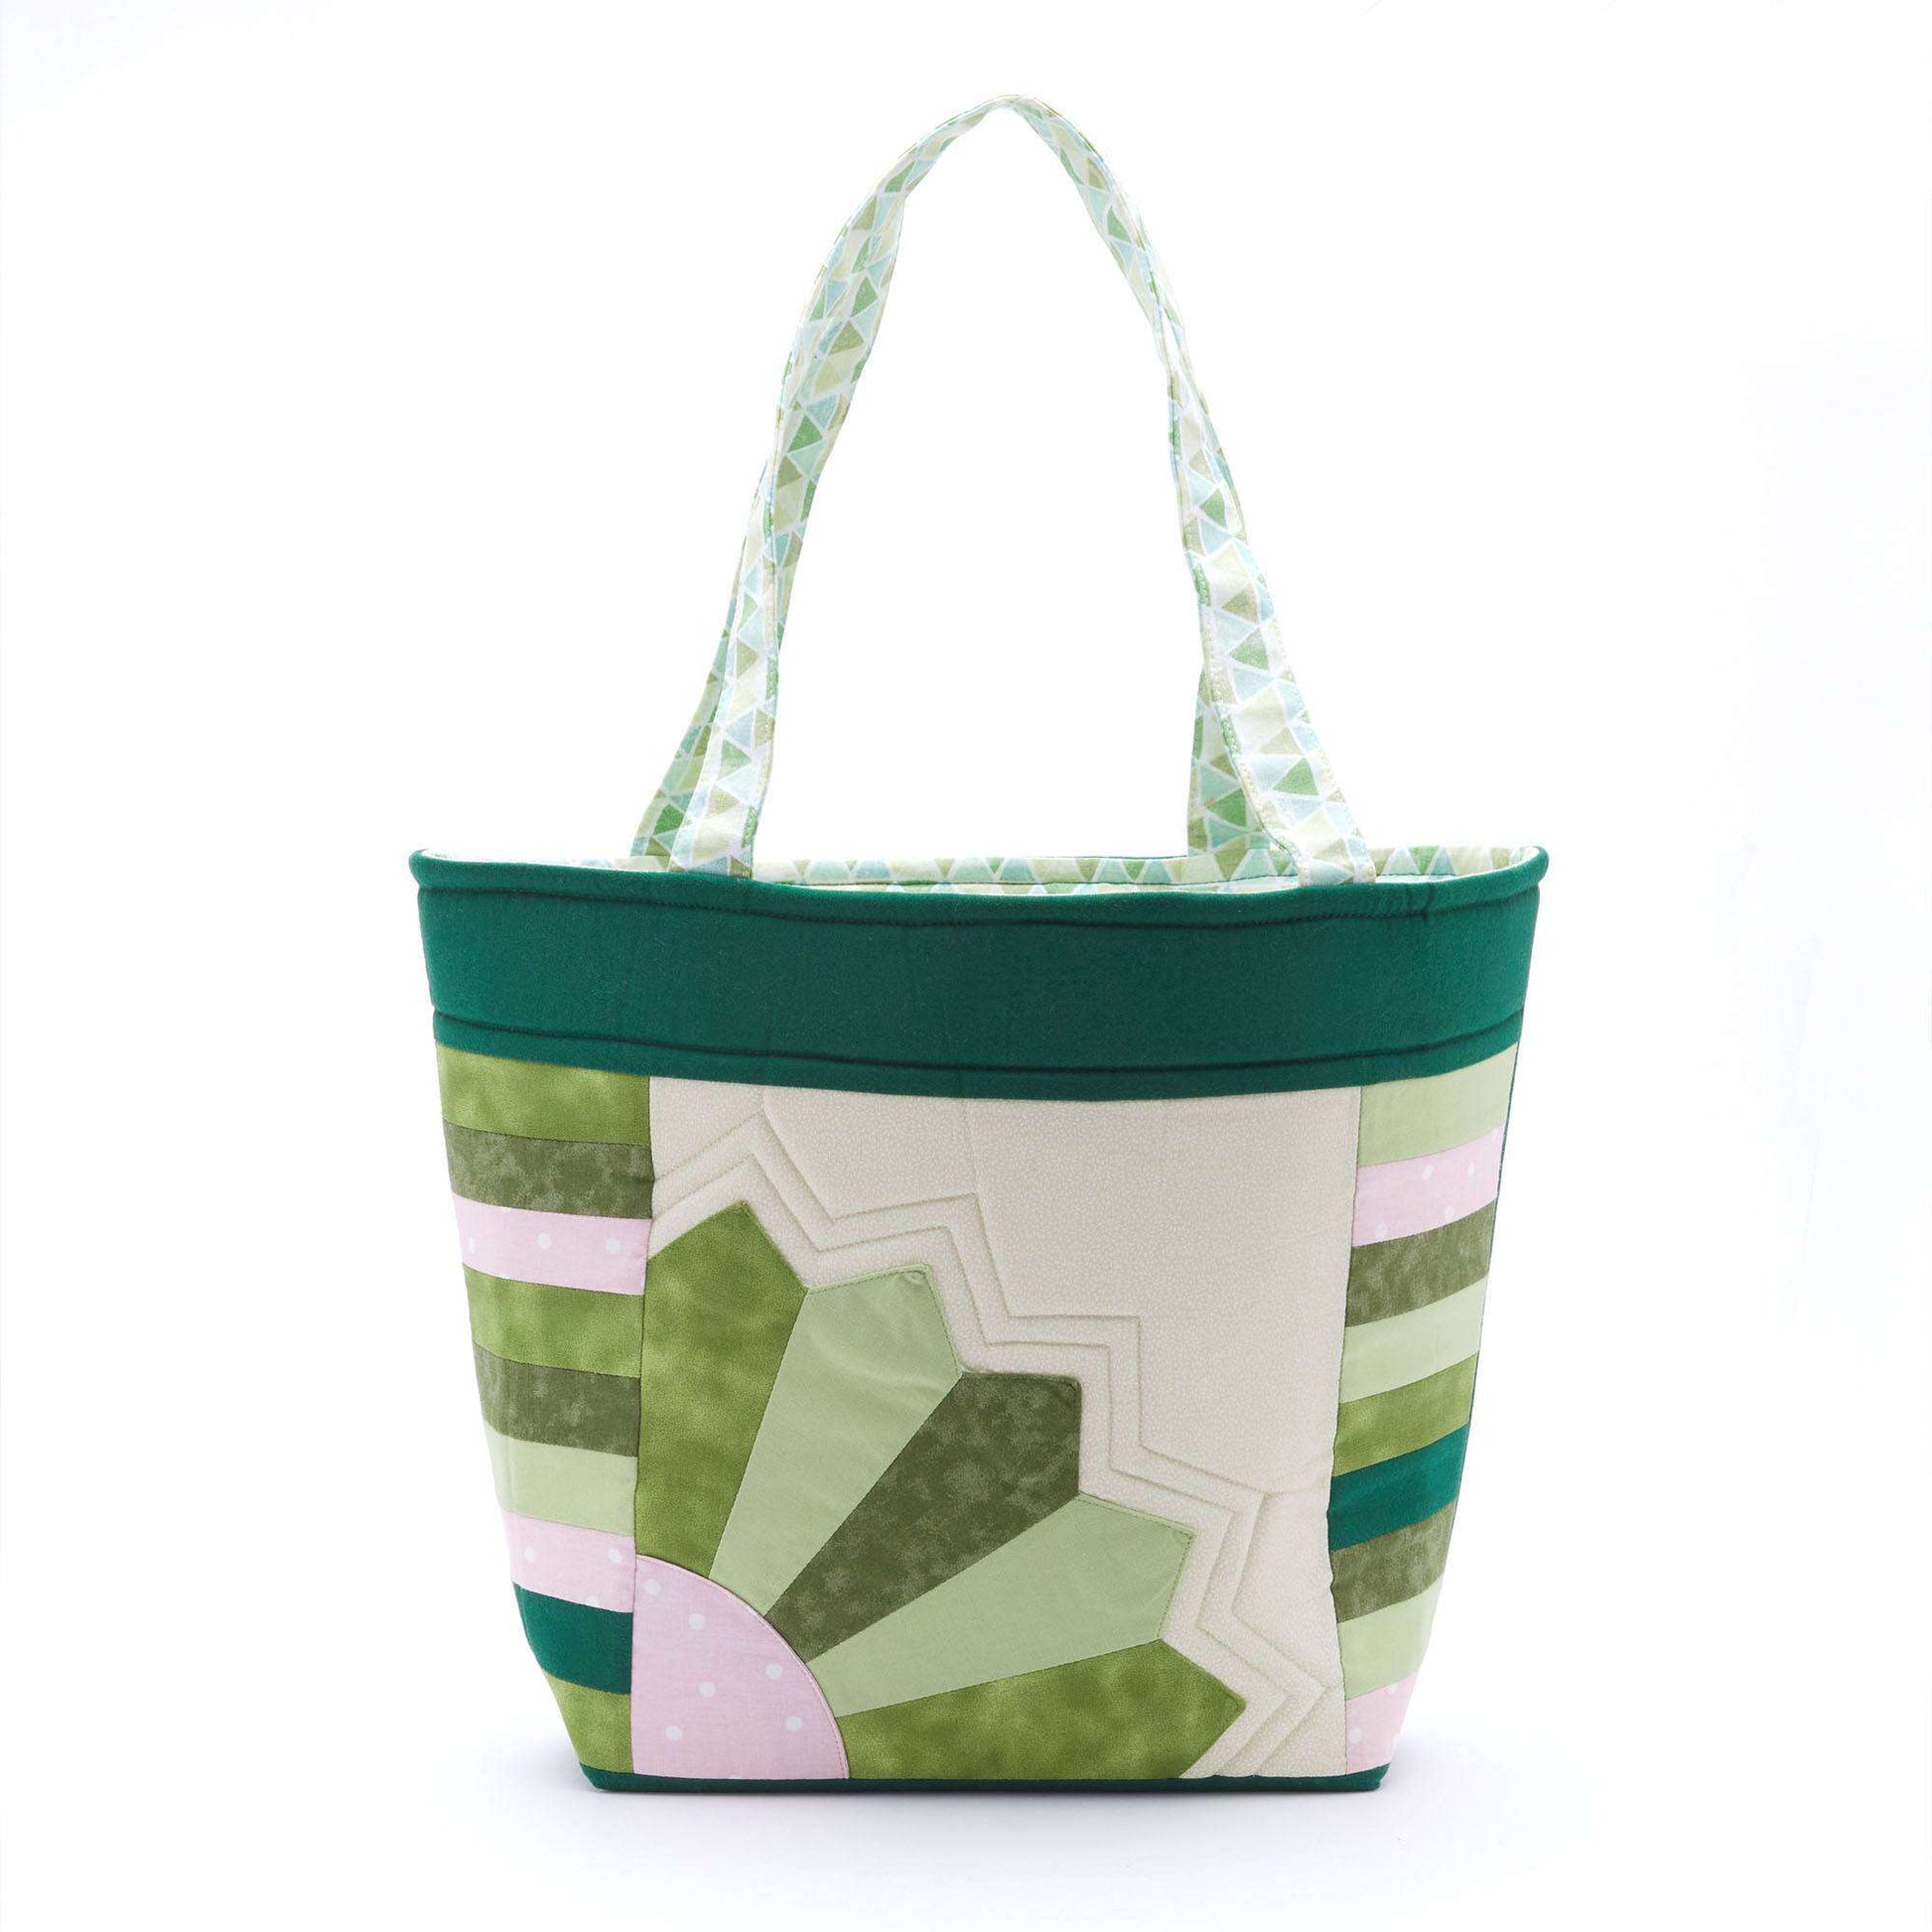 Free Coats & Clark Quilting Quilt Block Tote Pattern